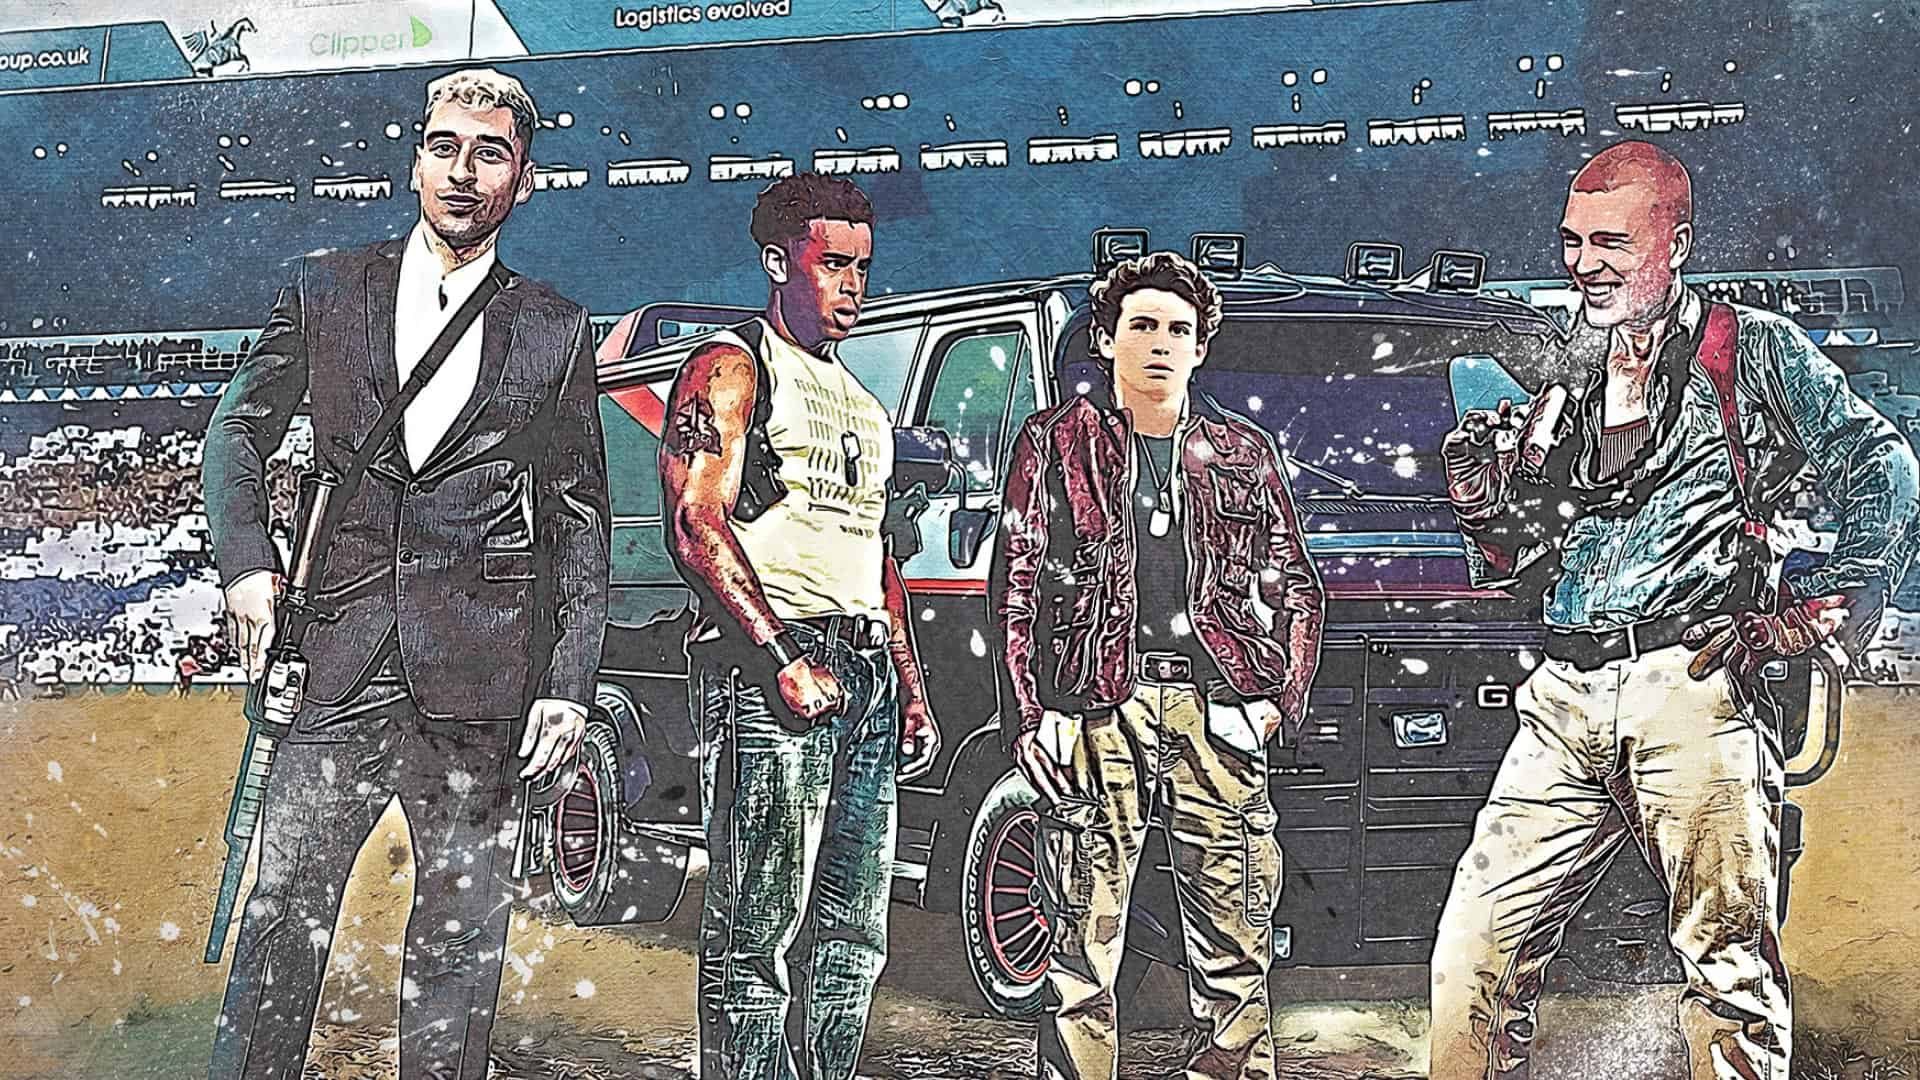 An illustration of our new gang of SOBs looking like characters from a Grand Theft Auto game, Marc Roca, Tyler Adams, Brenden Aaronson, and Rasmus Kristensen, on the pitch at Elland Road with their getaway car behind them, strapped up with firearms, except Brenden, because he's too innocent for that kind of thing